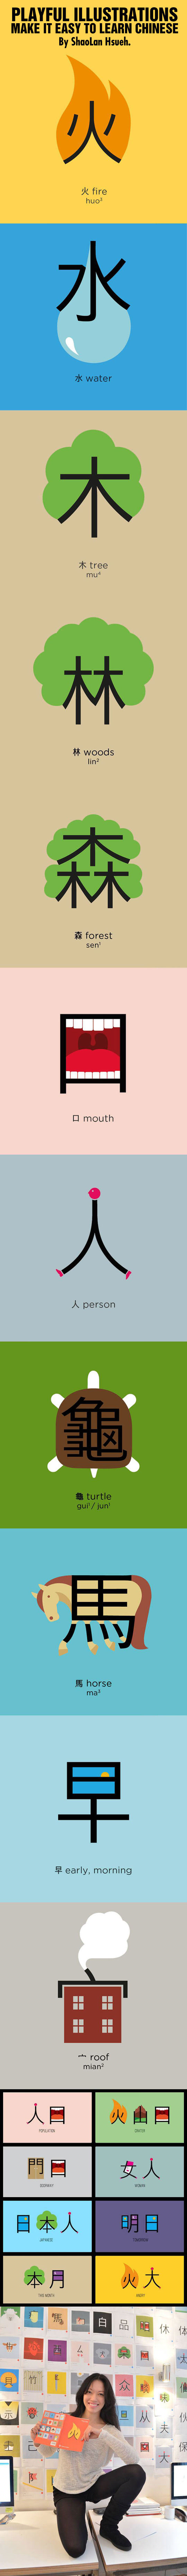 These Illustrations Make It Easy To Learn Chinese